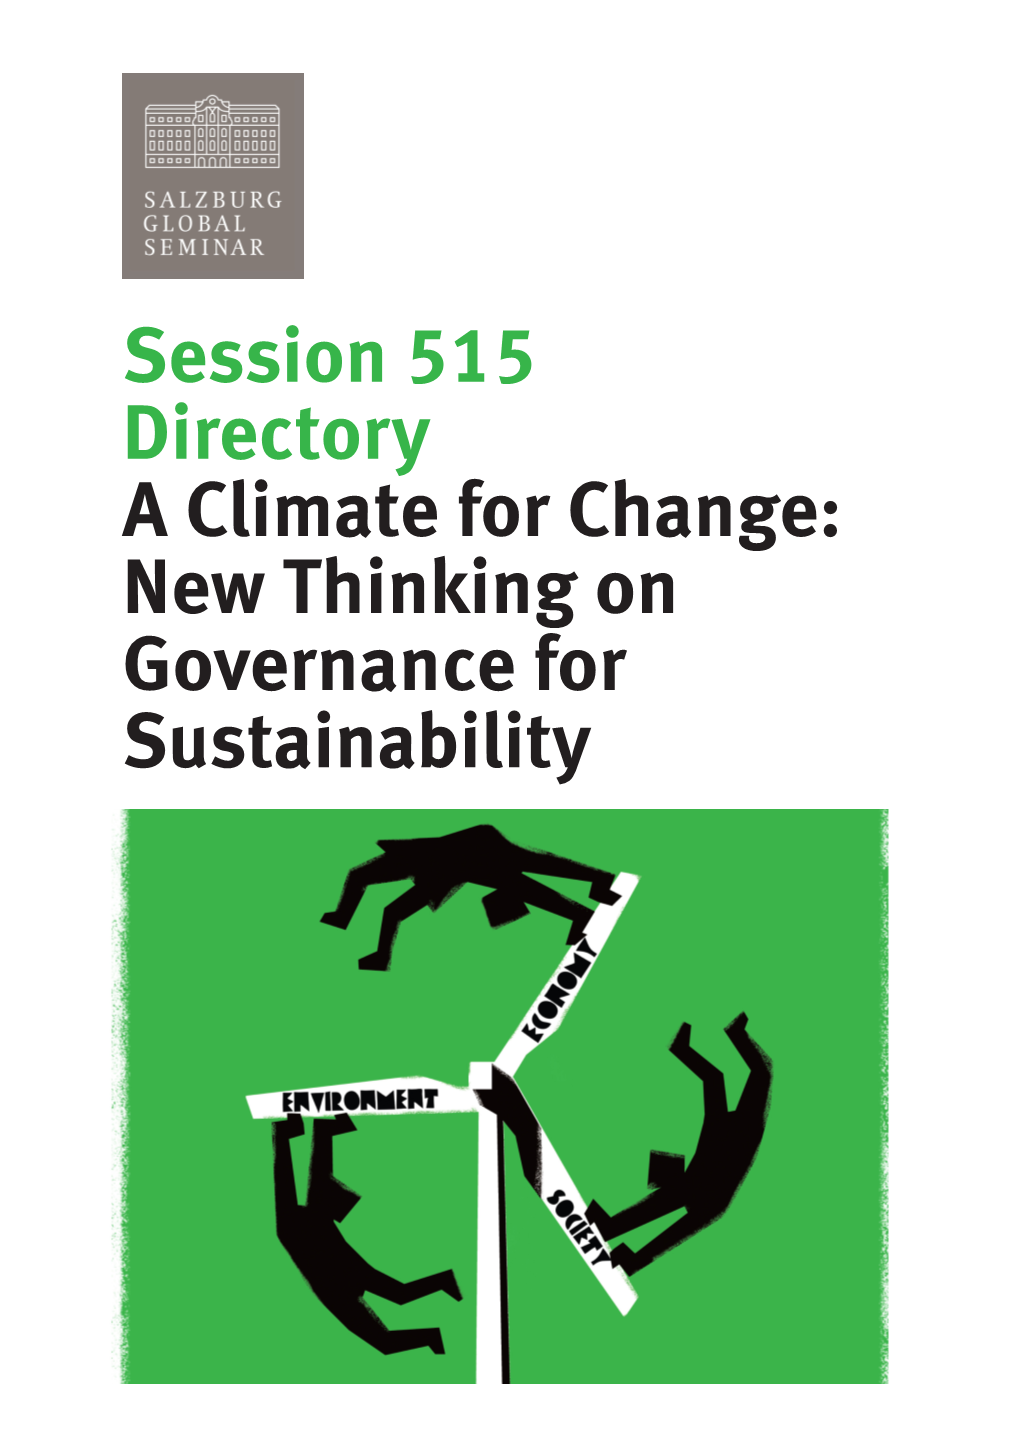 A Climate for Change: New Thinking on Governance for Sustainability